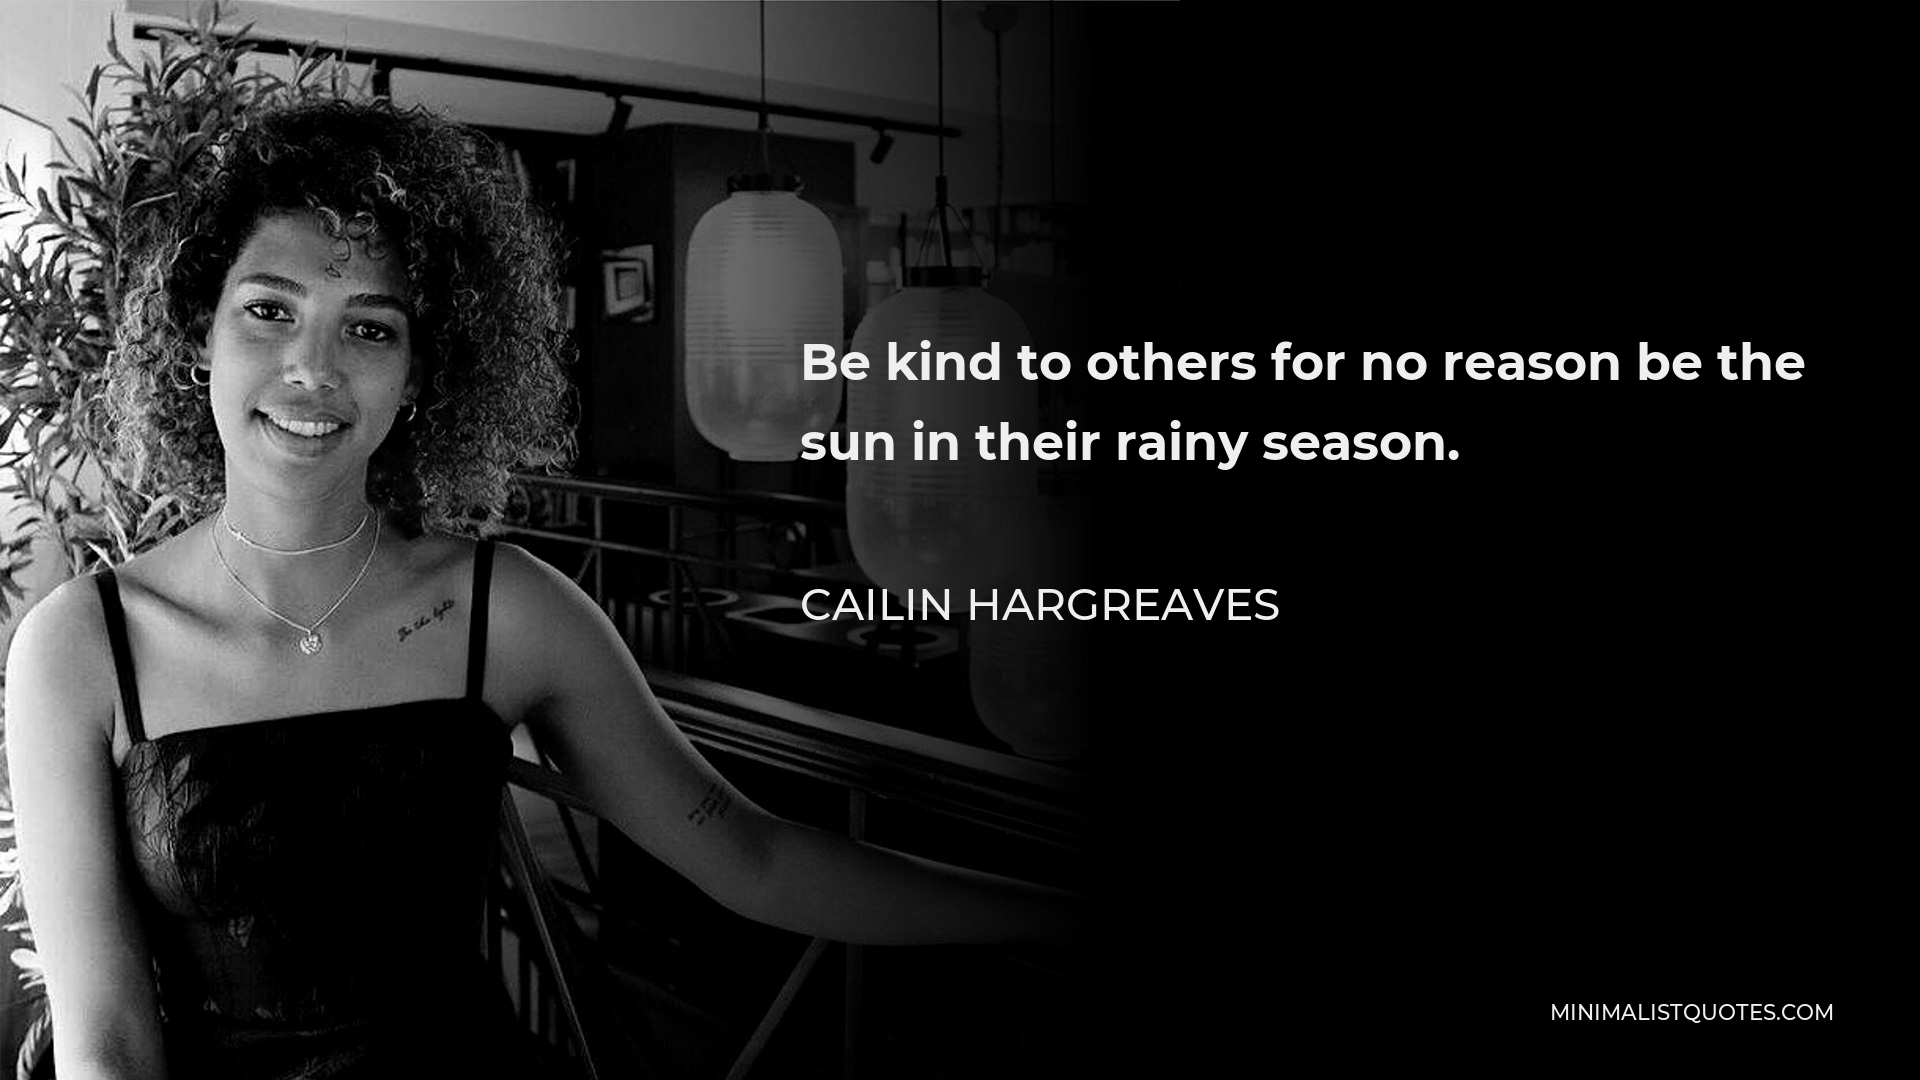 Cailin Hargreaves Quote - Be kind to others for no reason be the sun in their rainy season.